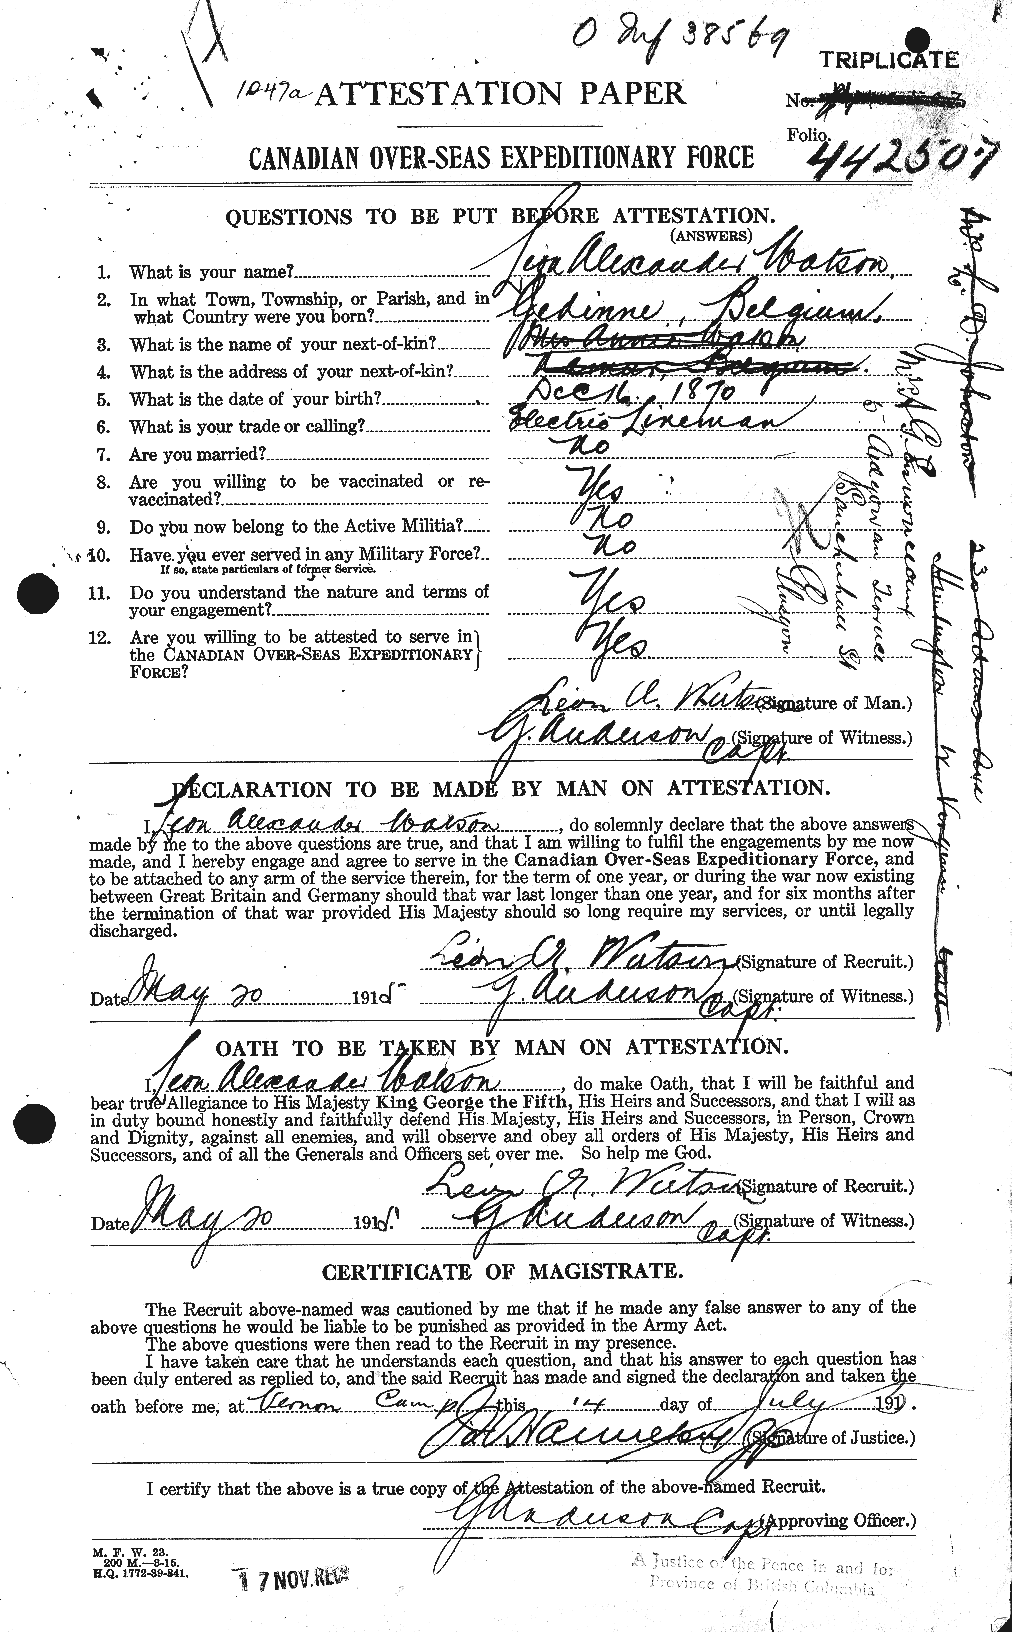 Personnel Records of the First World War - CEF 661092a